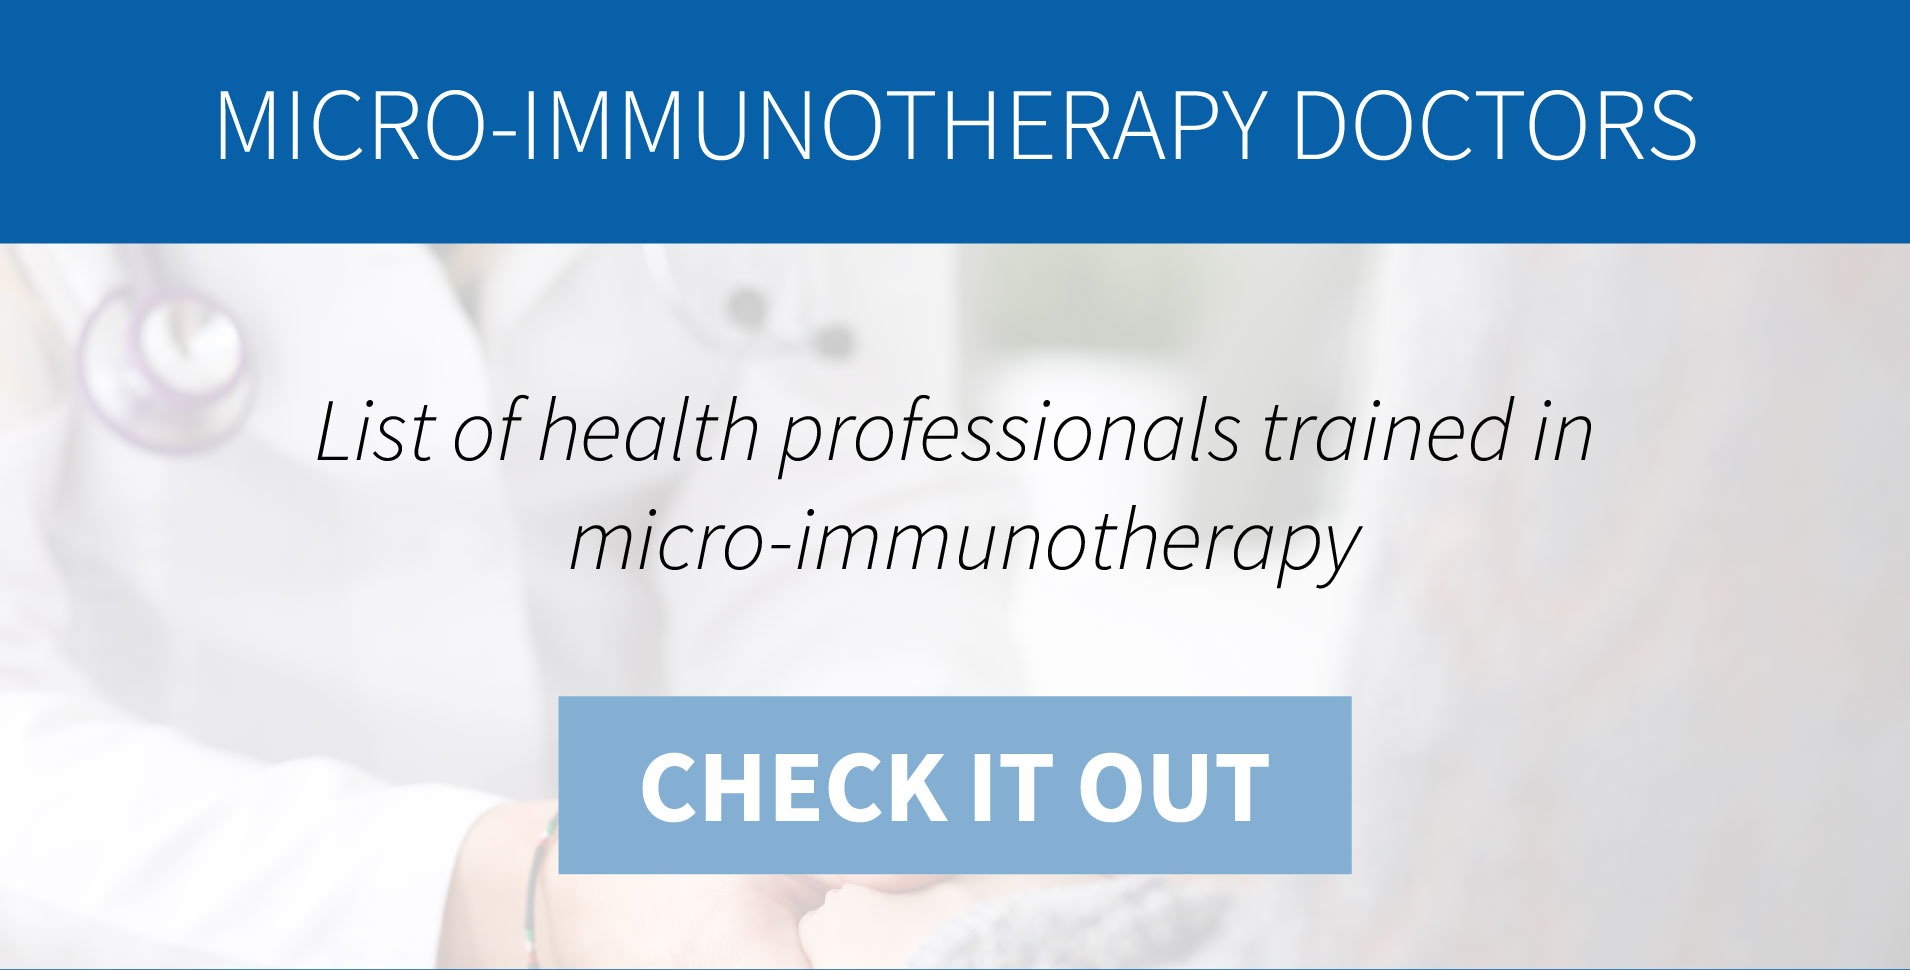 List of health professionals trained in micro-immunotherapy